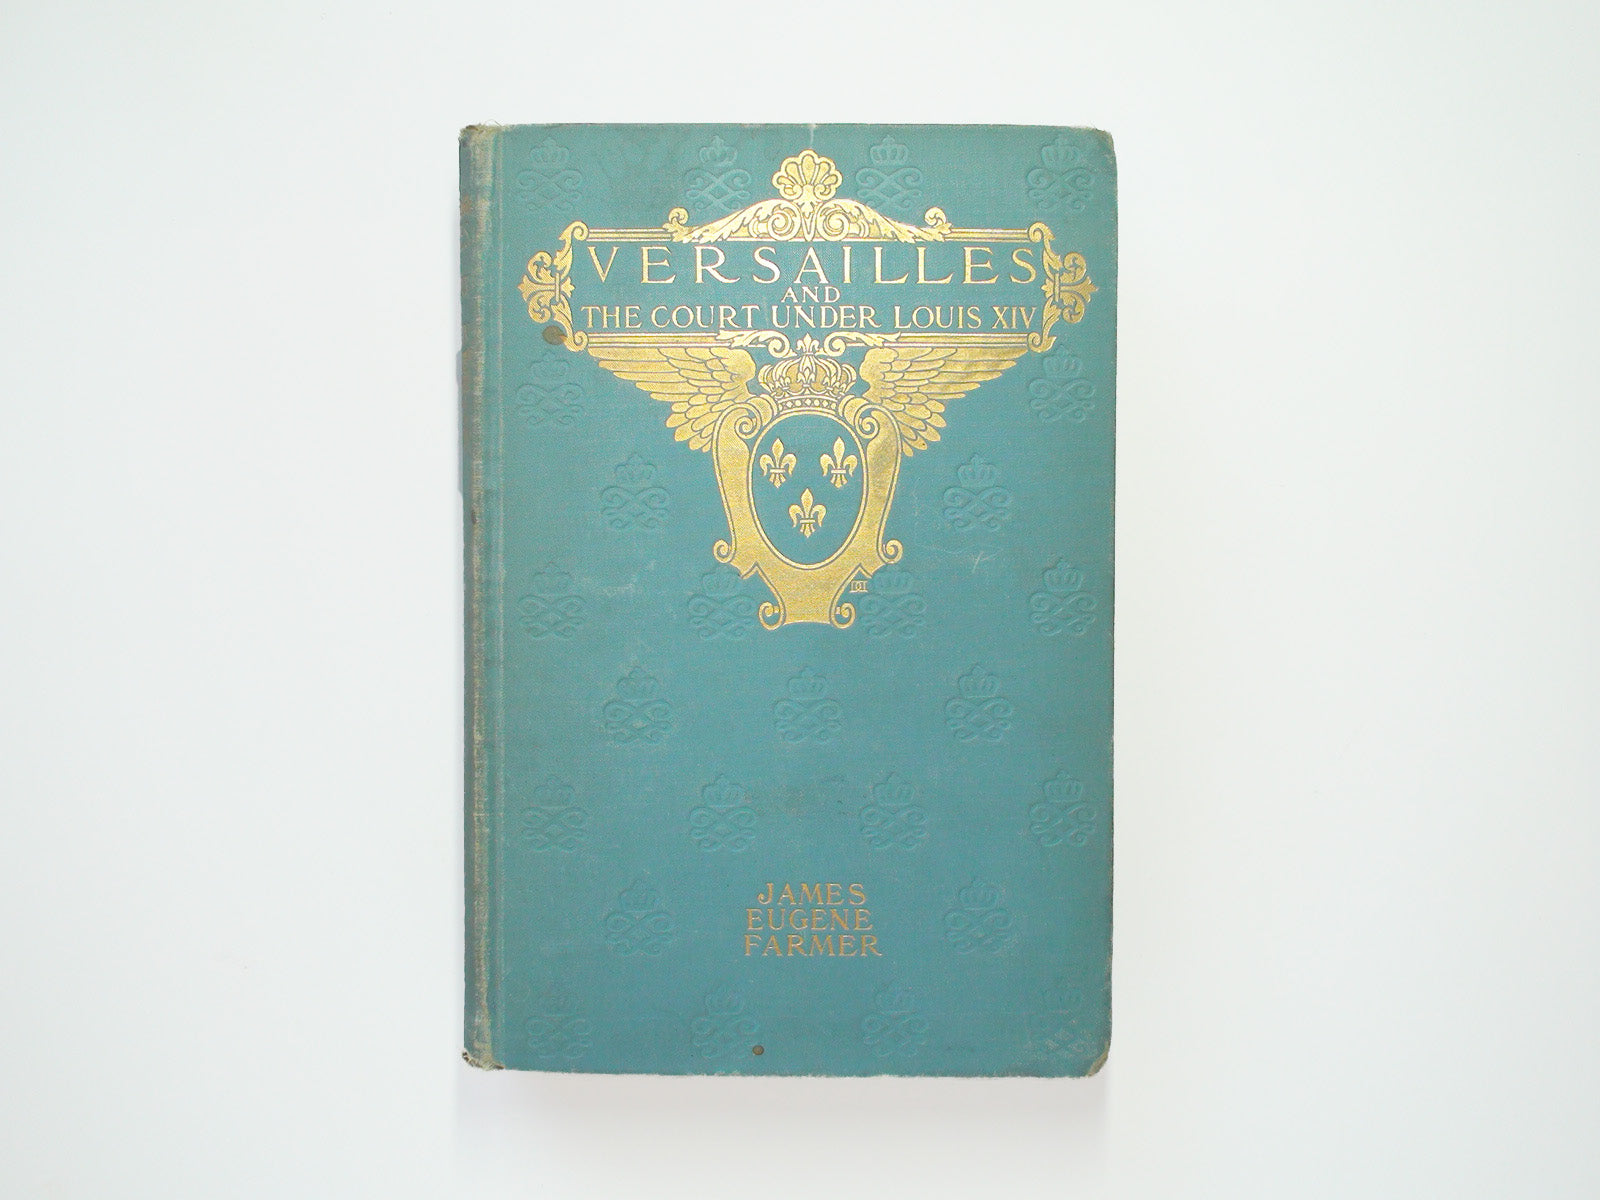 Versailles And the Court Under Louis XIV, James Eugene Farmer, Illustrated, 1905